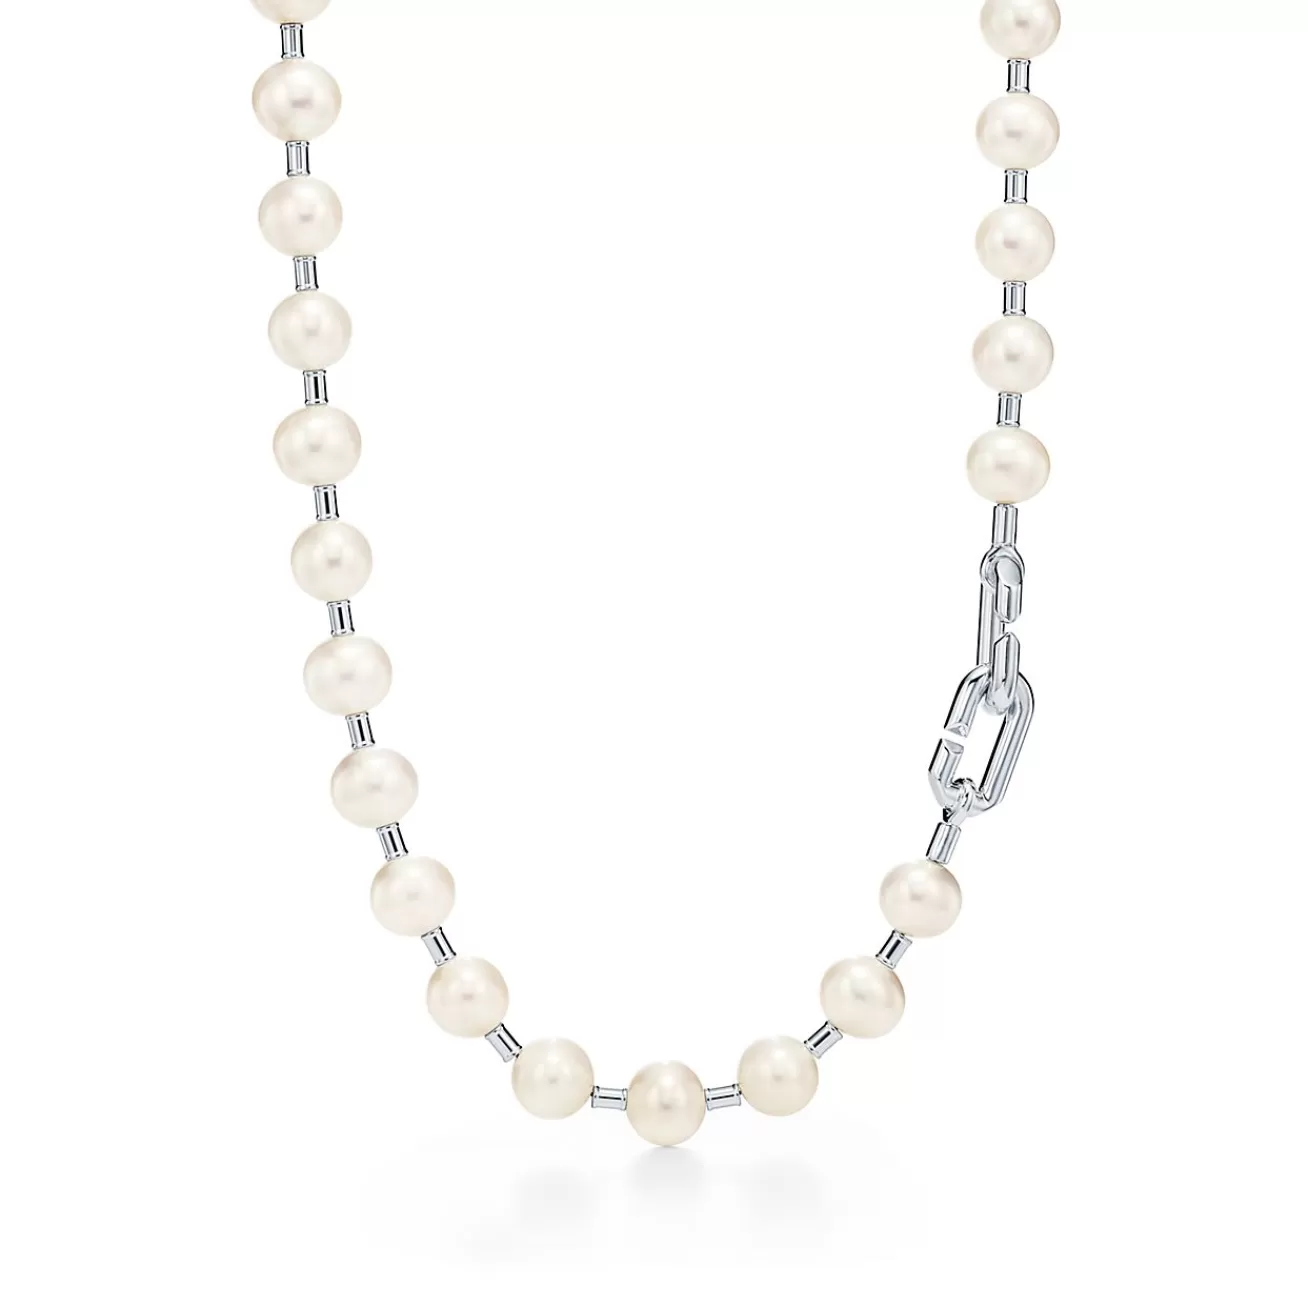 Tiffany & Co. Tiffany HardWear freshwater pearl necklace in sterling silver. | ^ Necklaces & Pendants | Gifts for Her